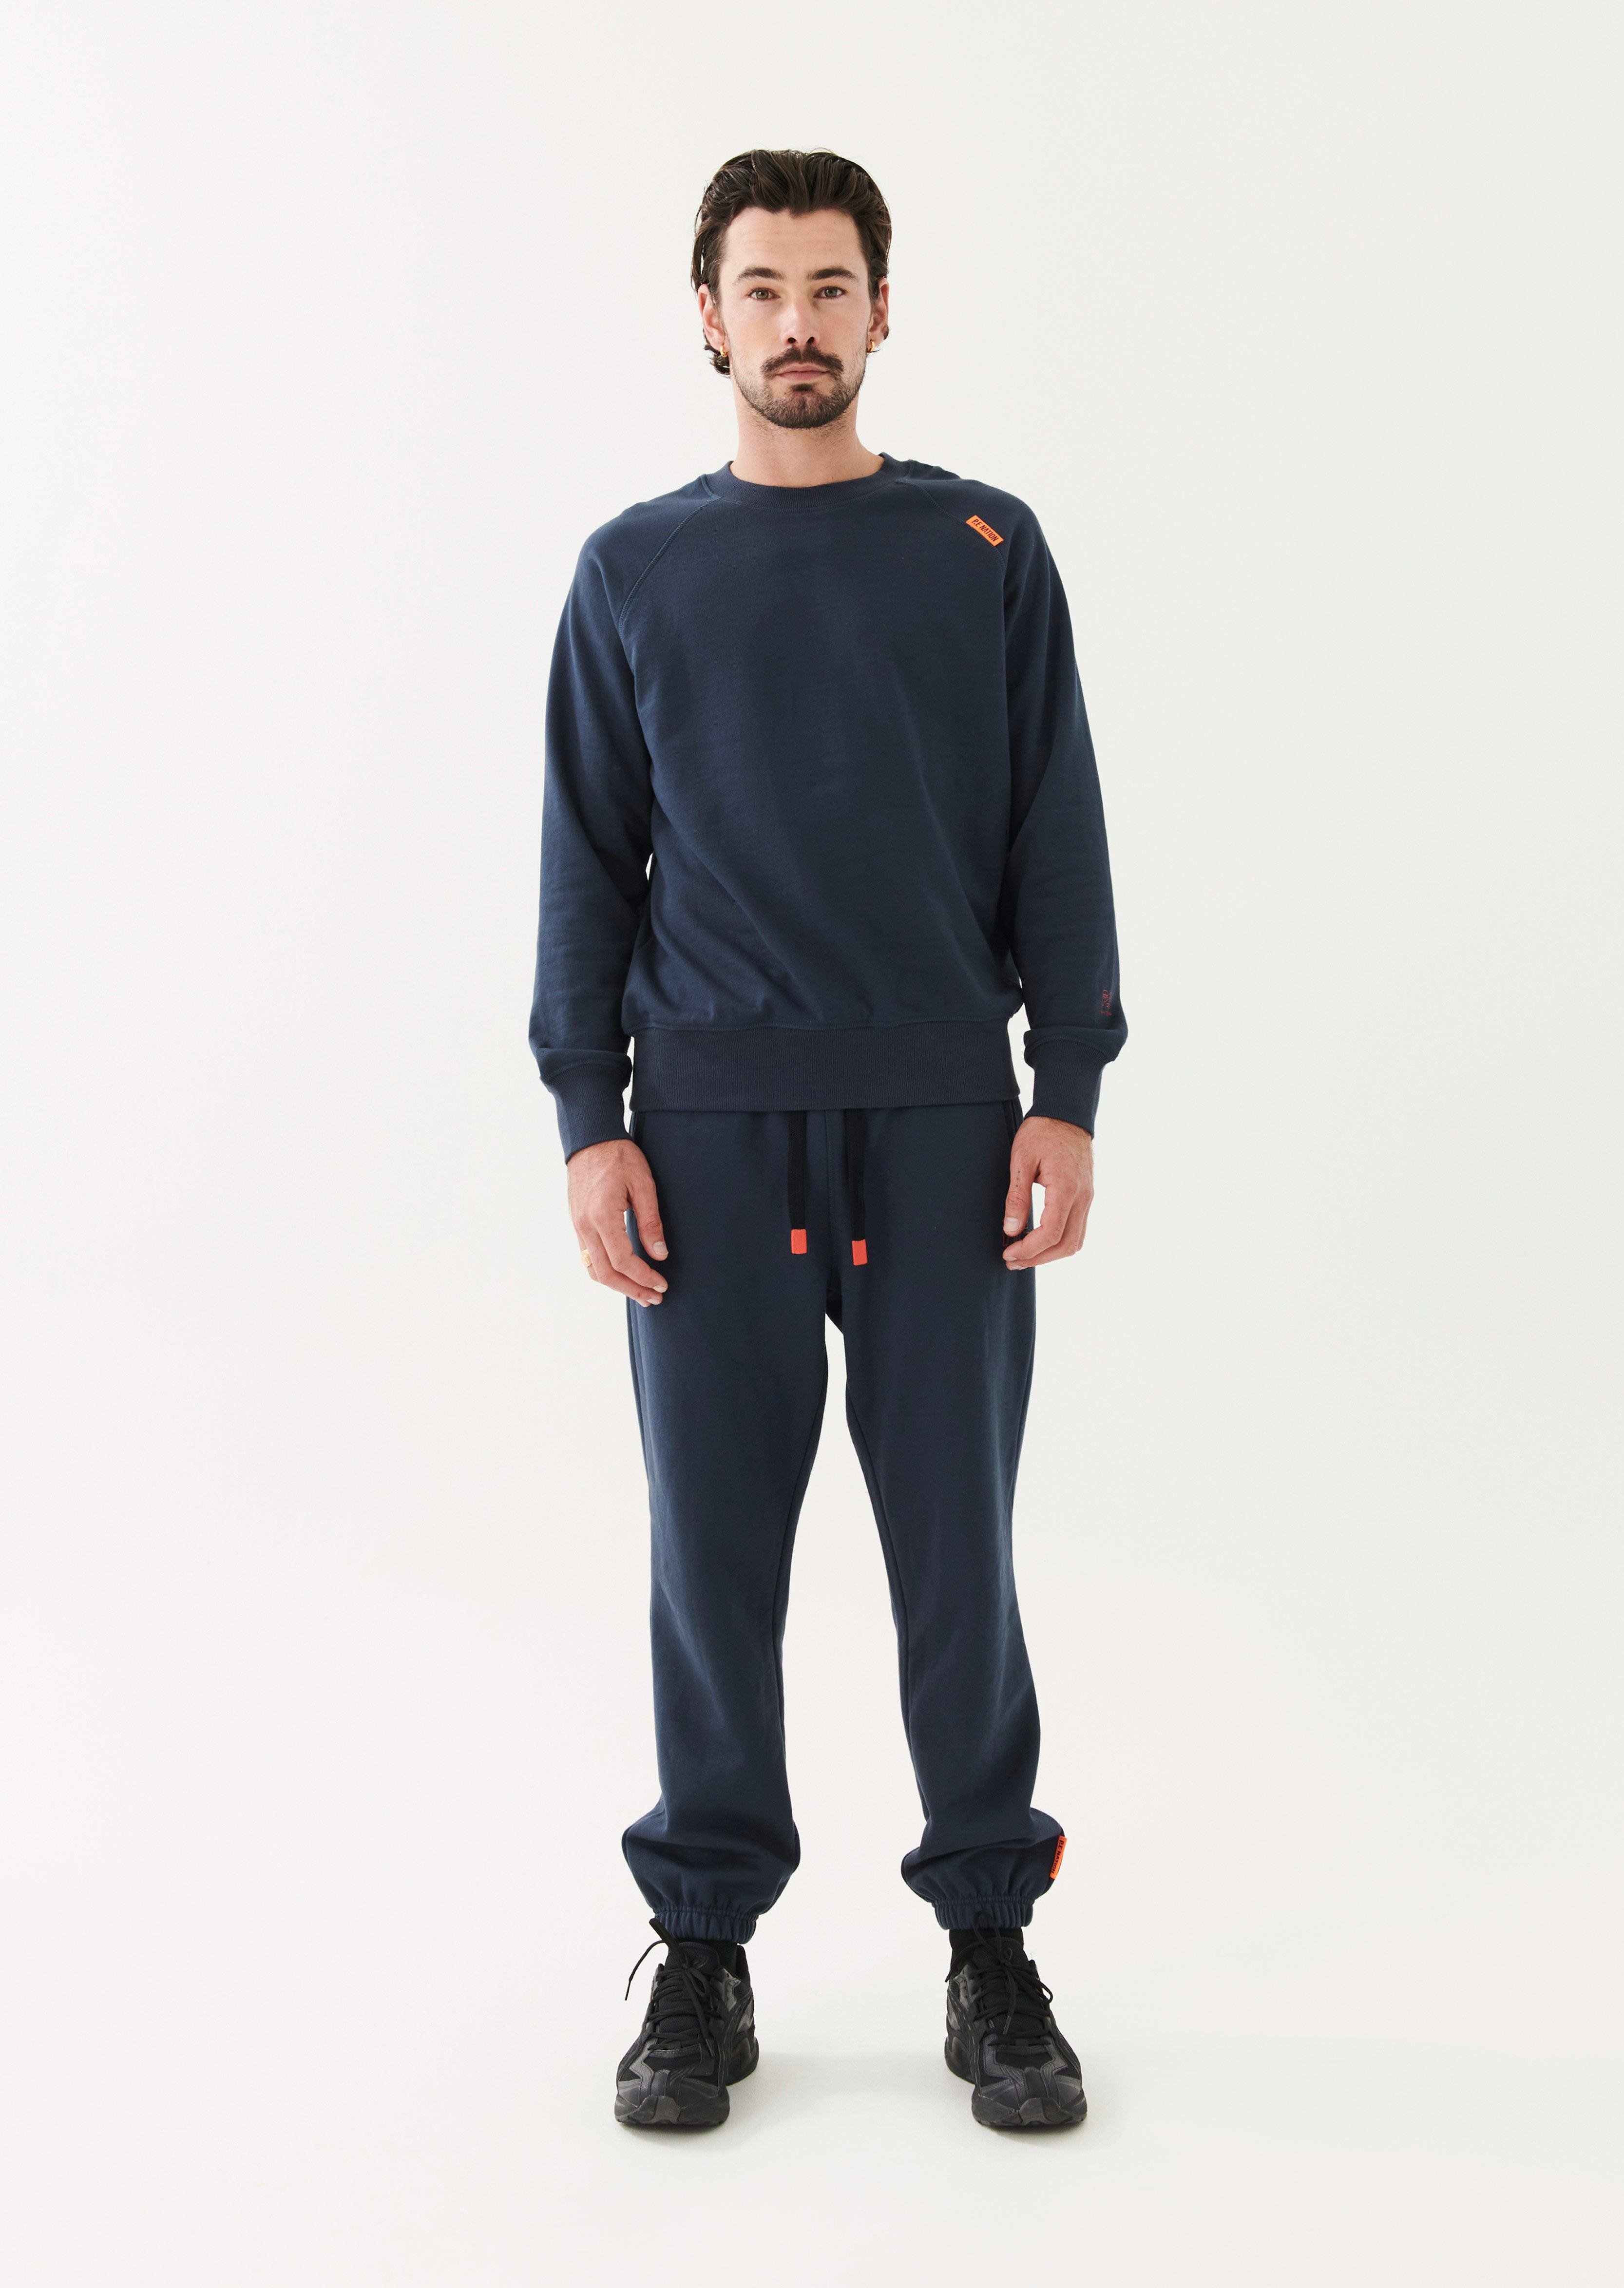 CUTBACK TRACKPANT IN NAVY by P.E NATION